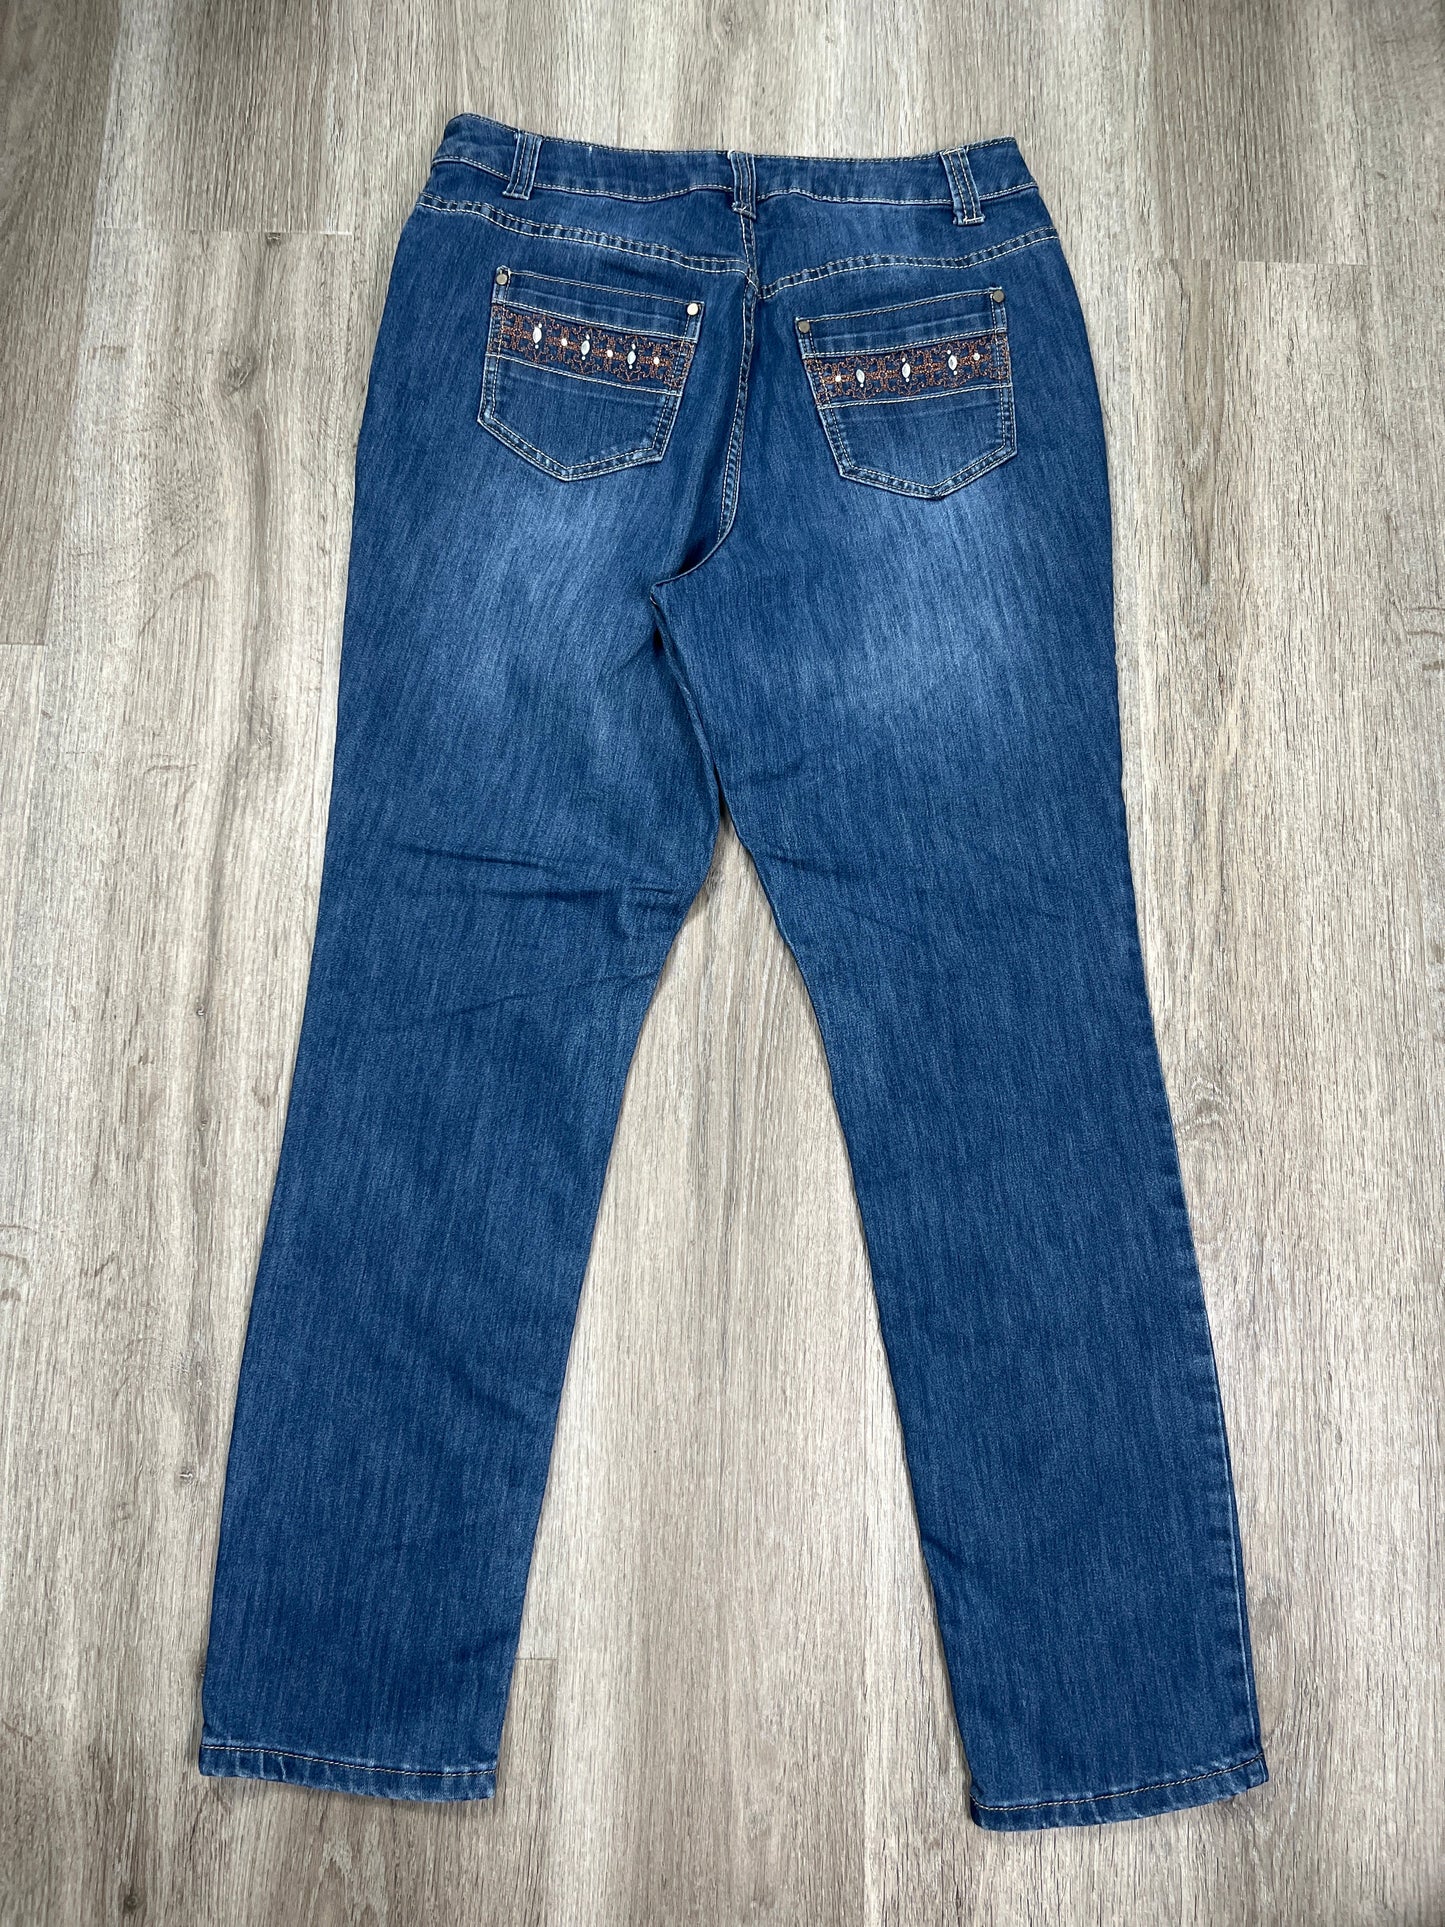 Blue Denim Jeans Straight Christopher And Banks, Size 10